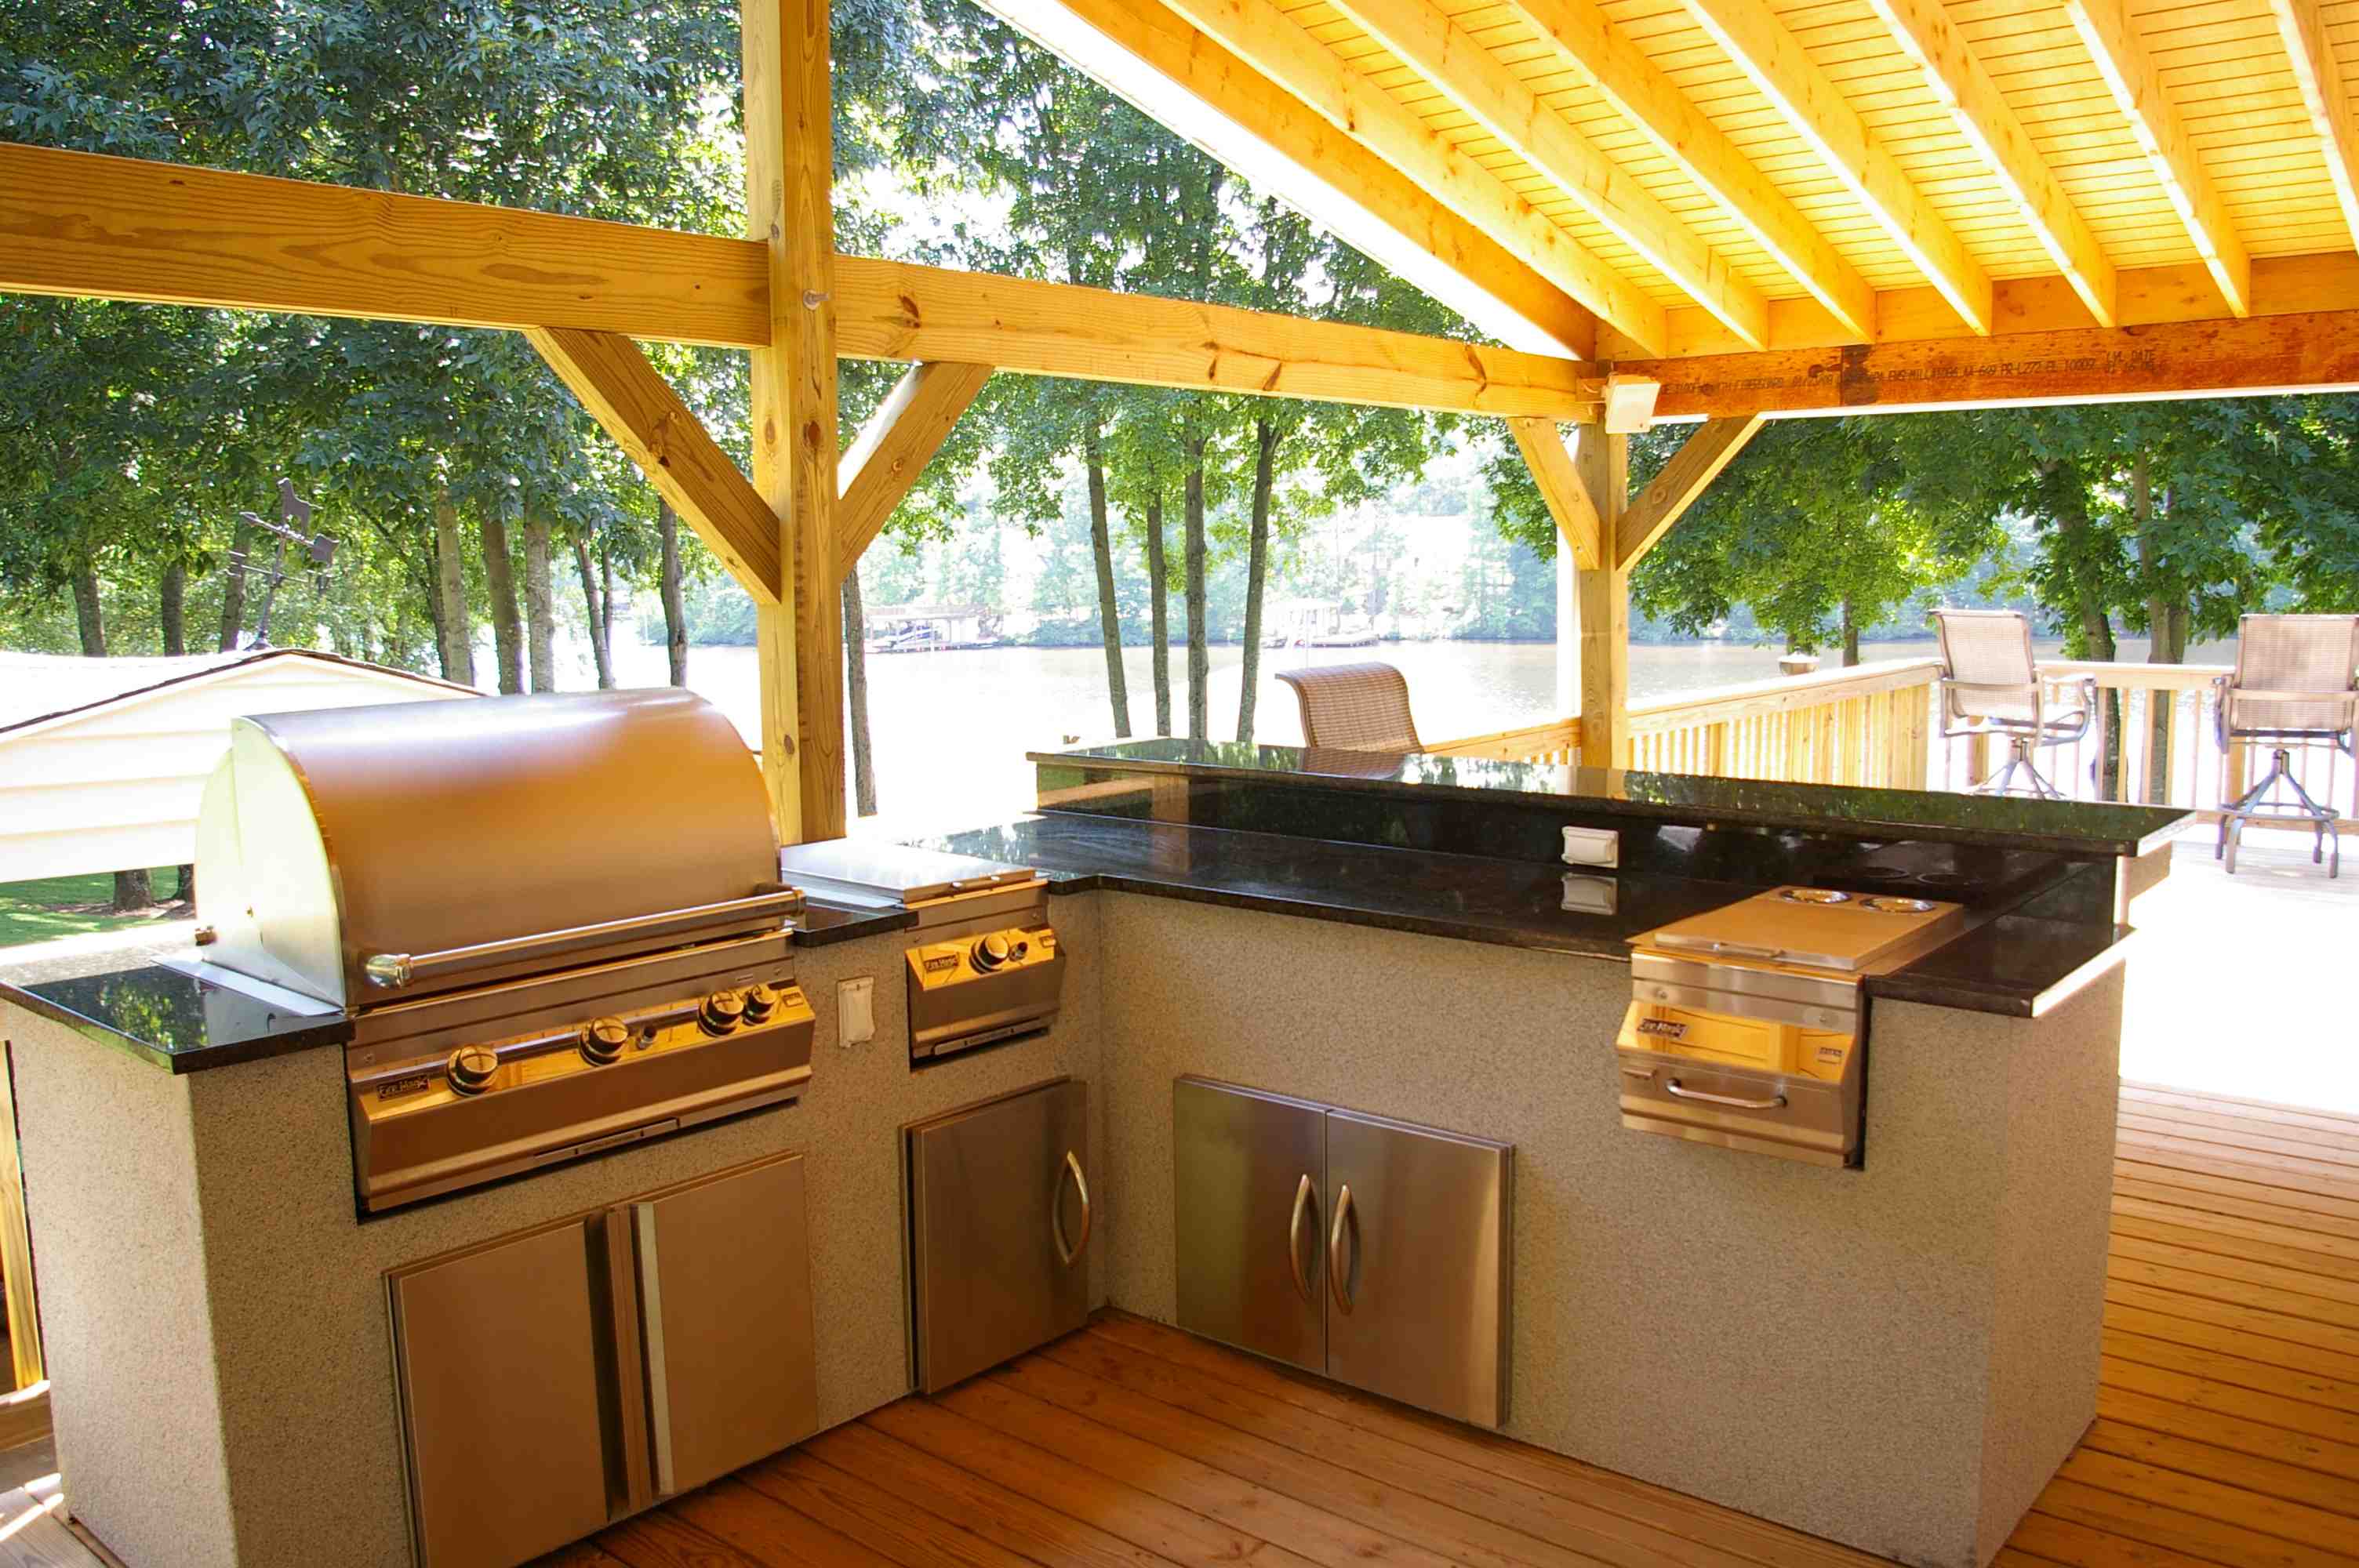 Covered Stucco Outdoor Kitchen Lifestyle Outdoor Kitchens